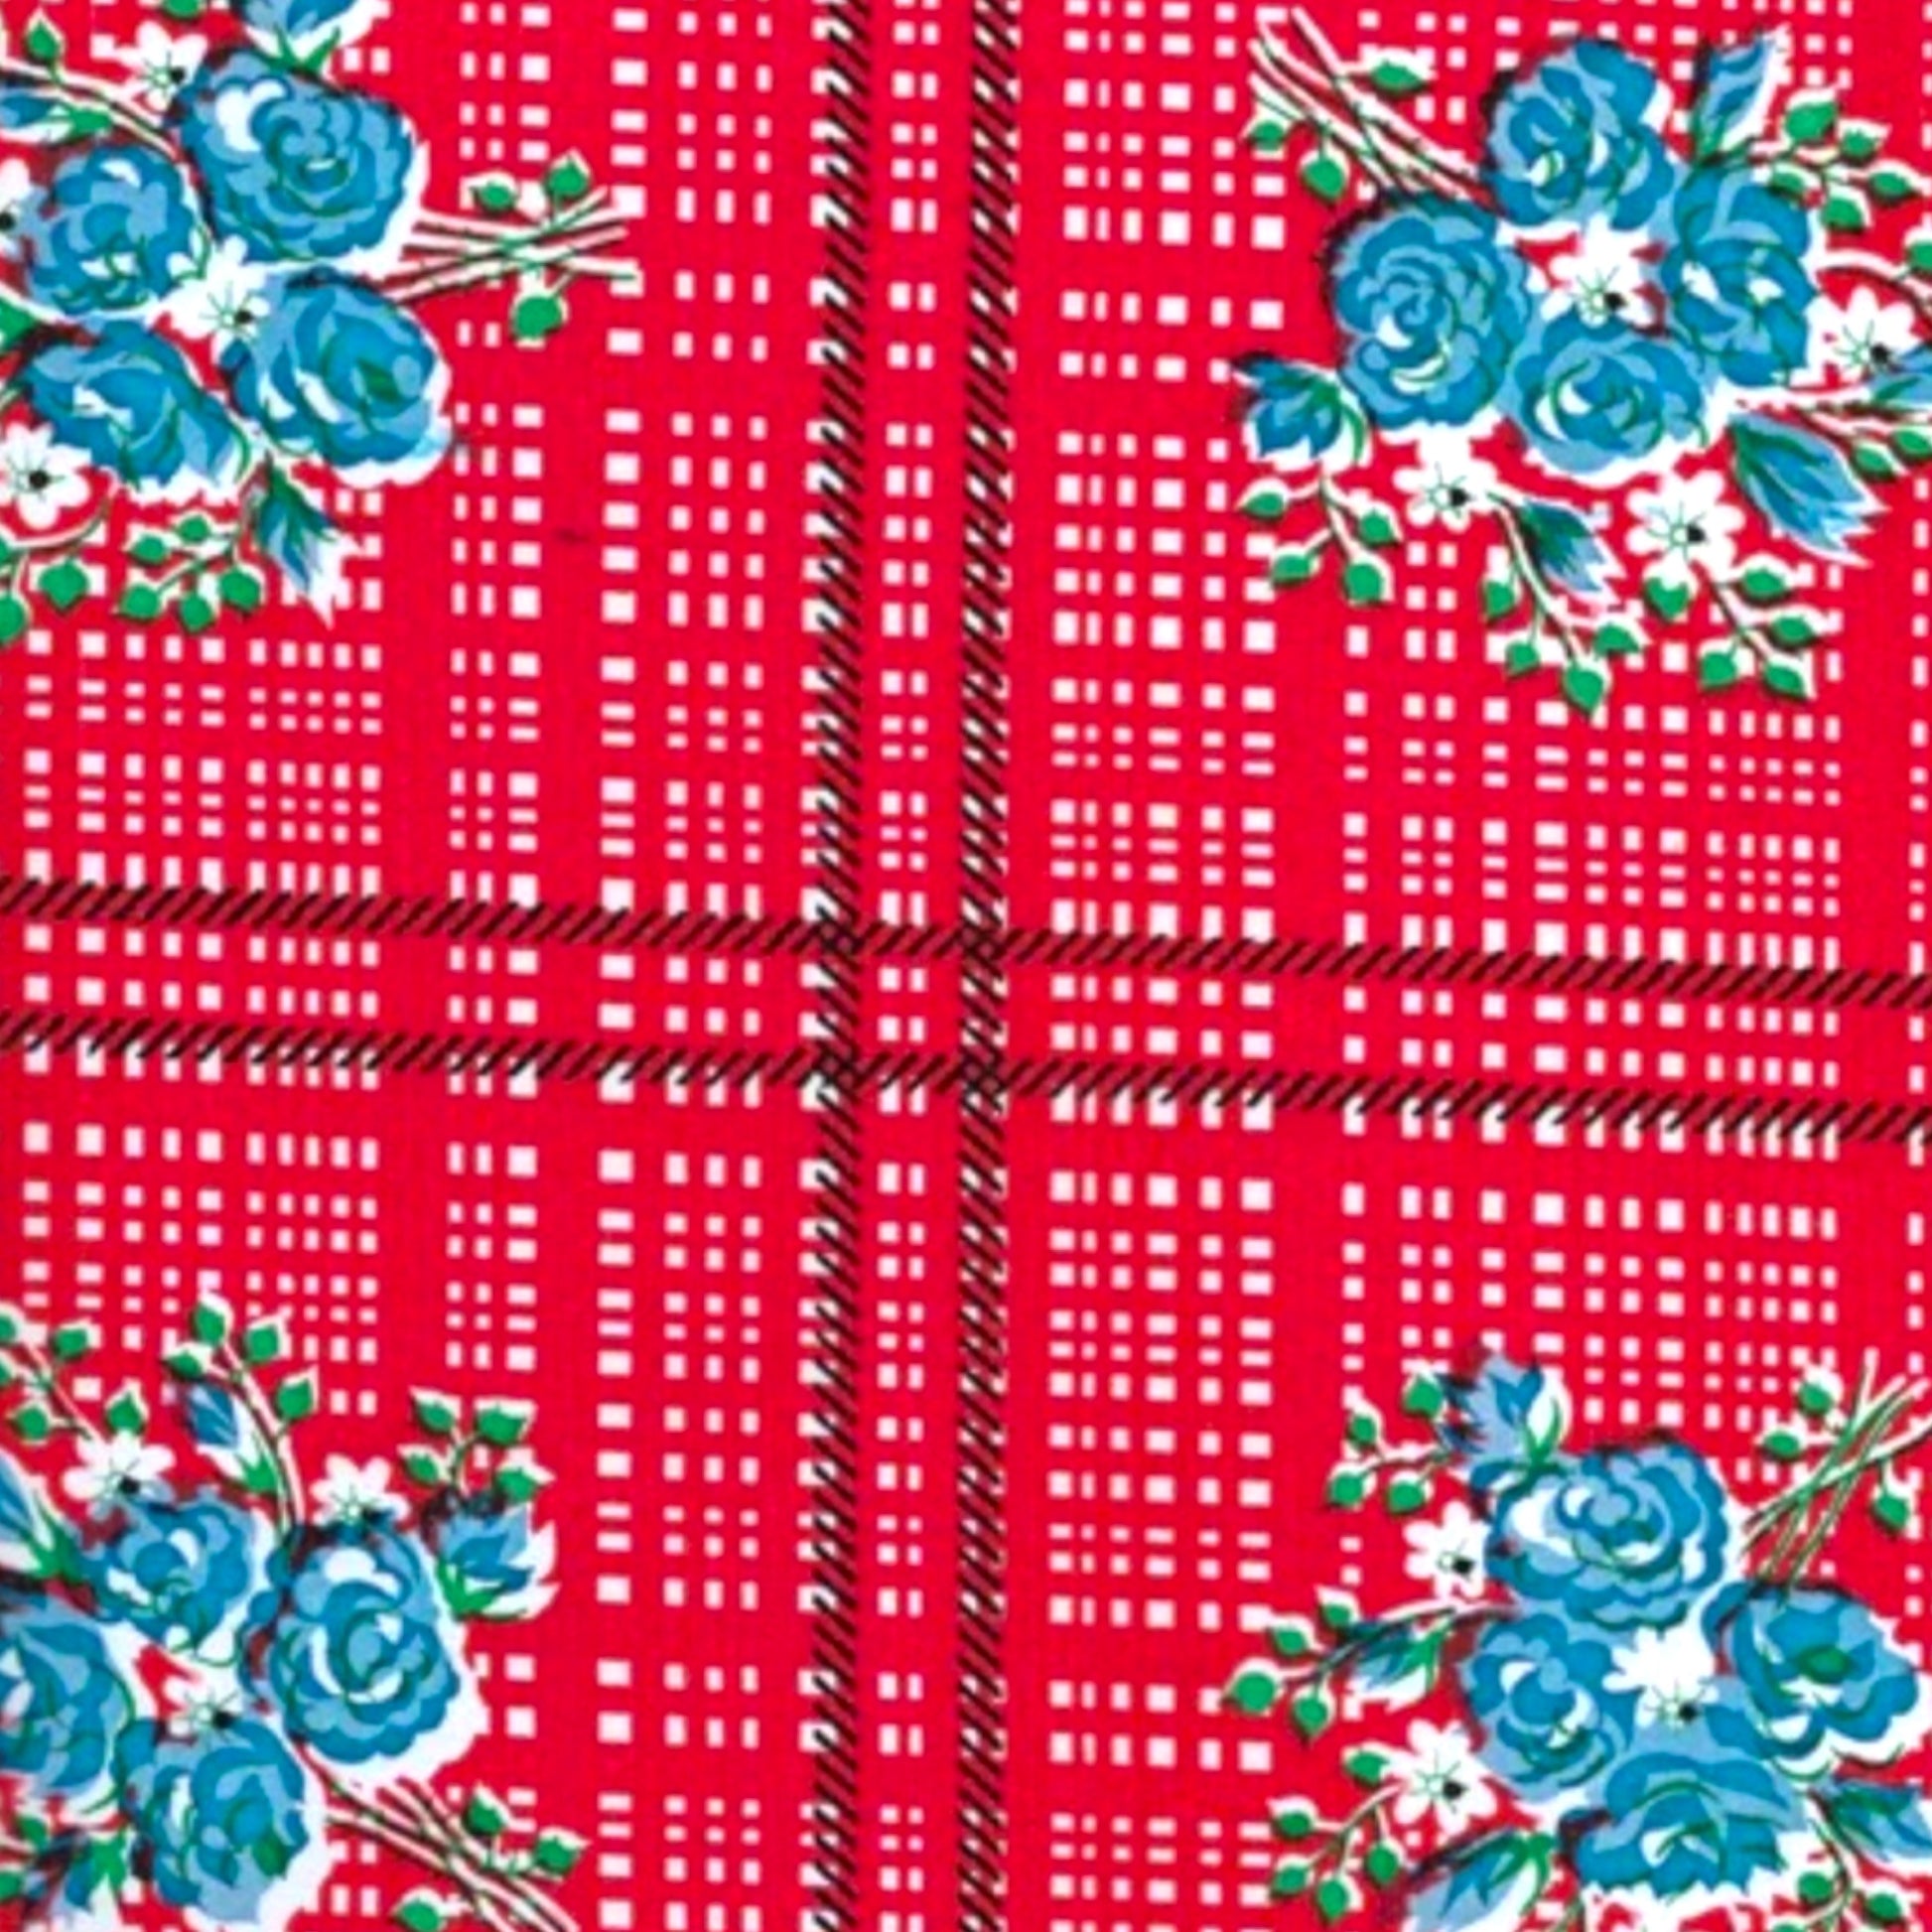 Oilcloth Tablecloth - Red Bouquet - Hella Kitsch